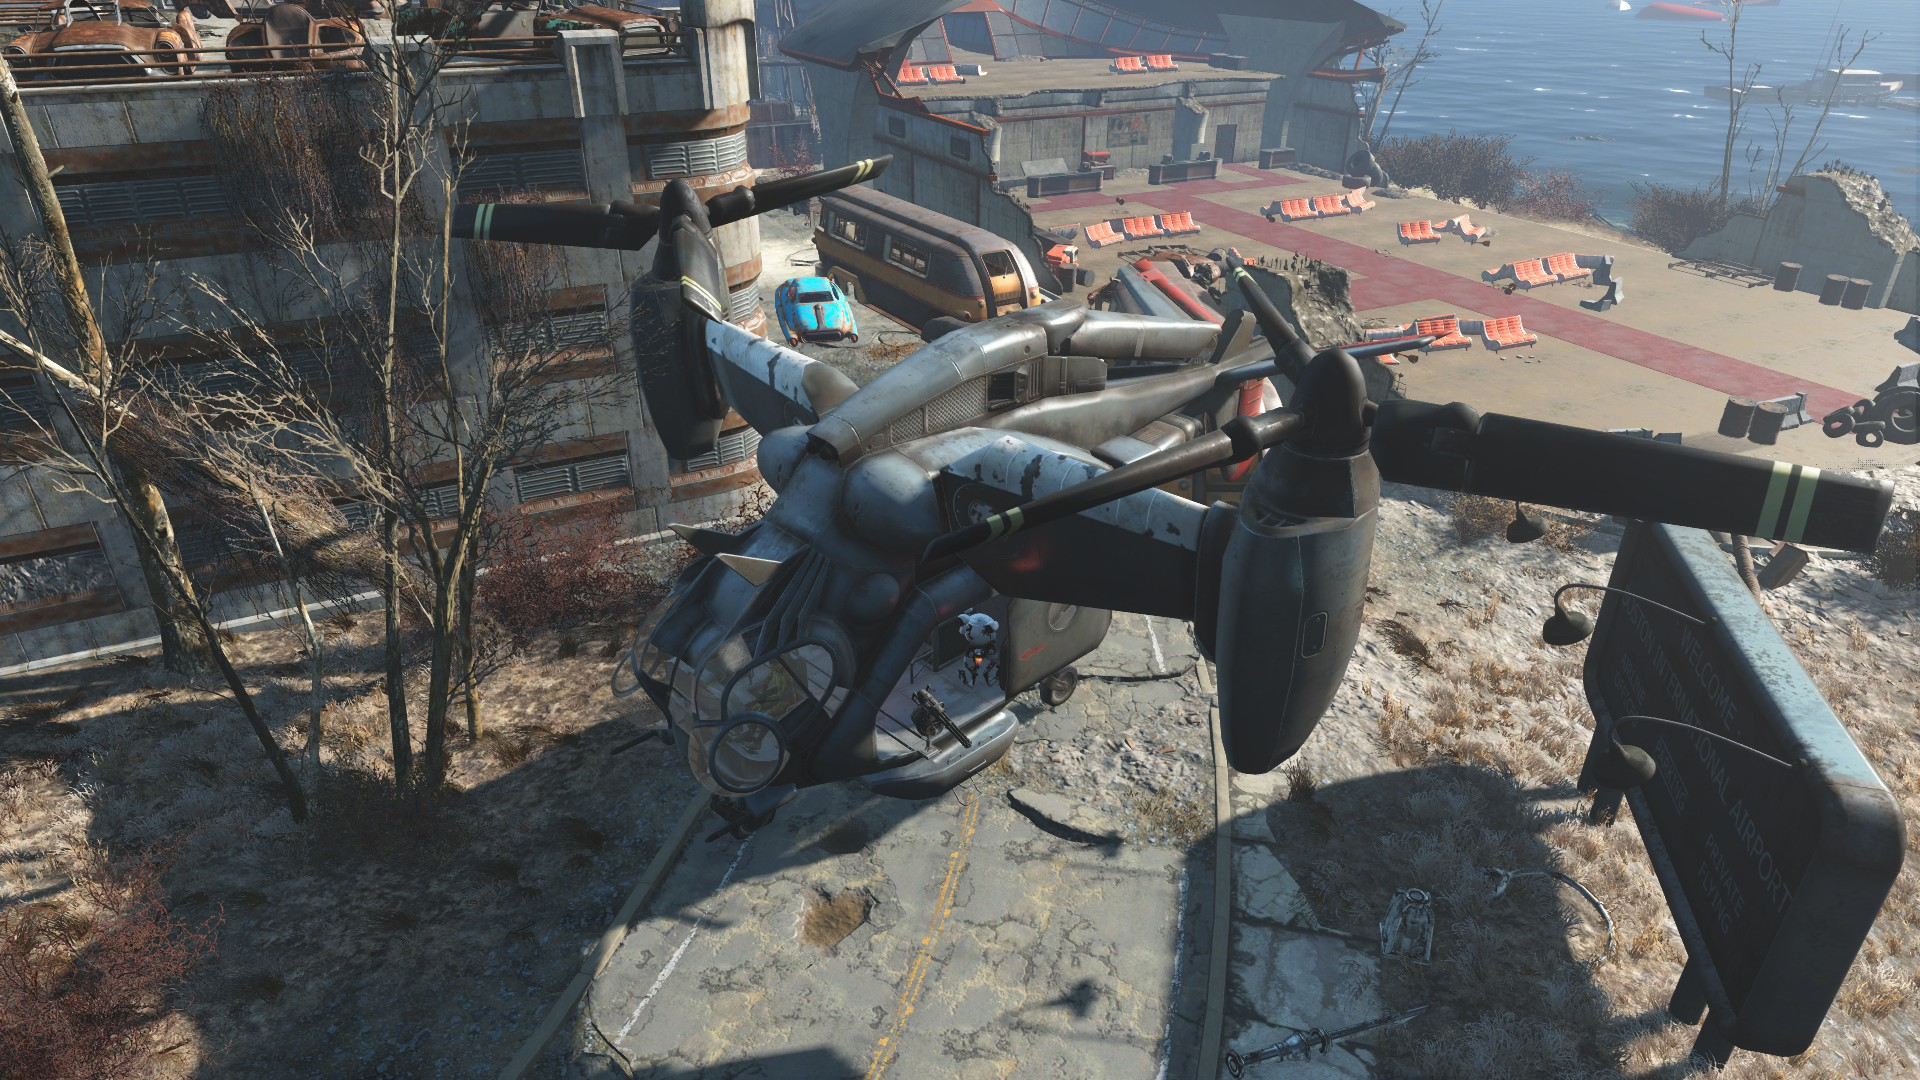 Image - Fo4vertibirdsupport.png | Fallout Wiki | FANDOM powered by Wikia